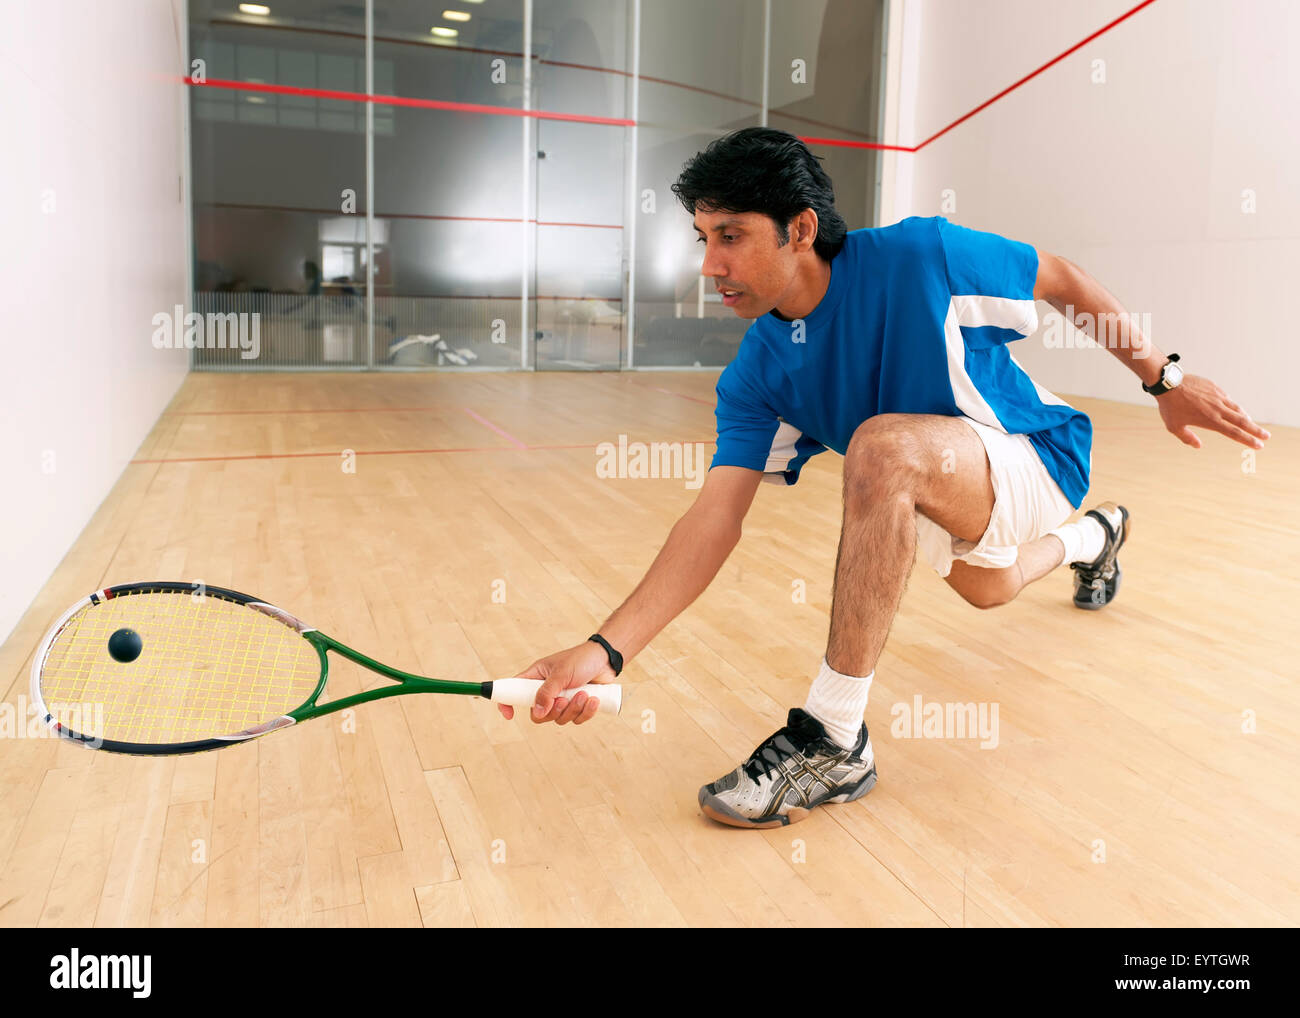 Squash player hiting a drop shot in a squash court Stock Photo - Alamy